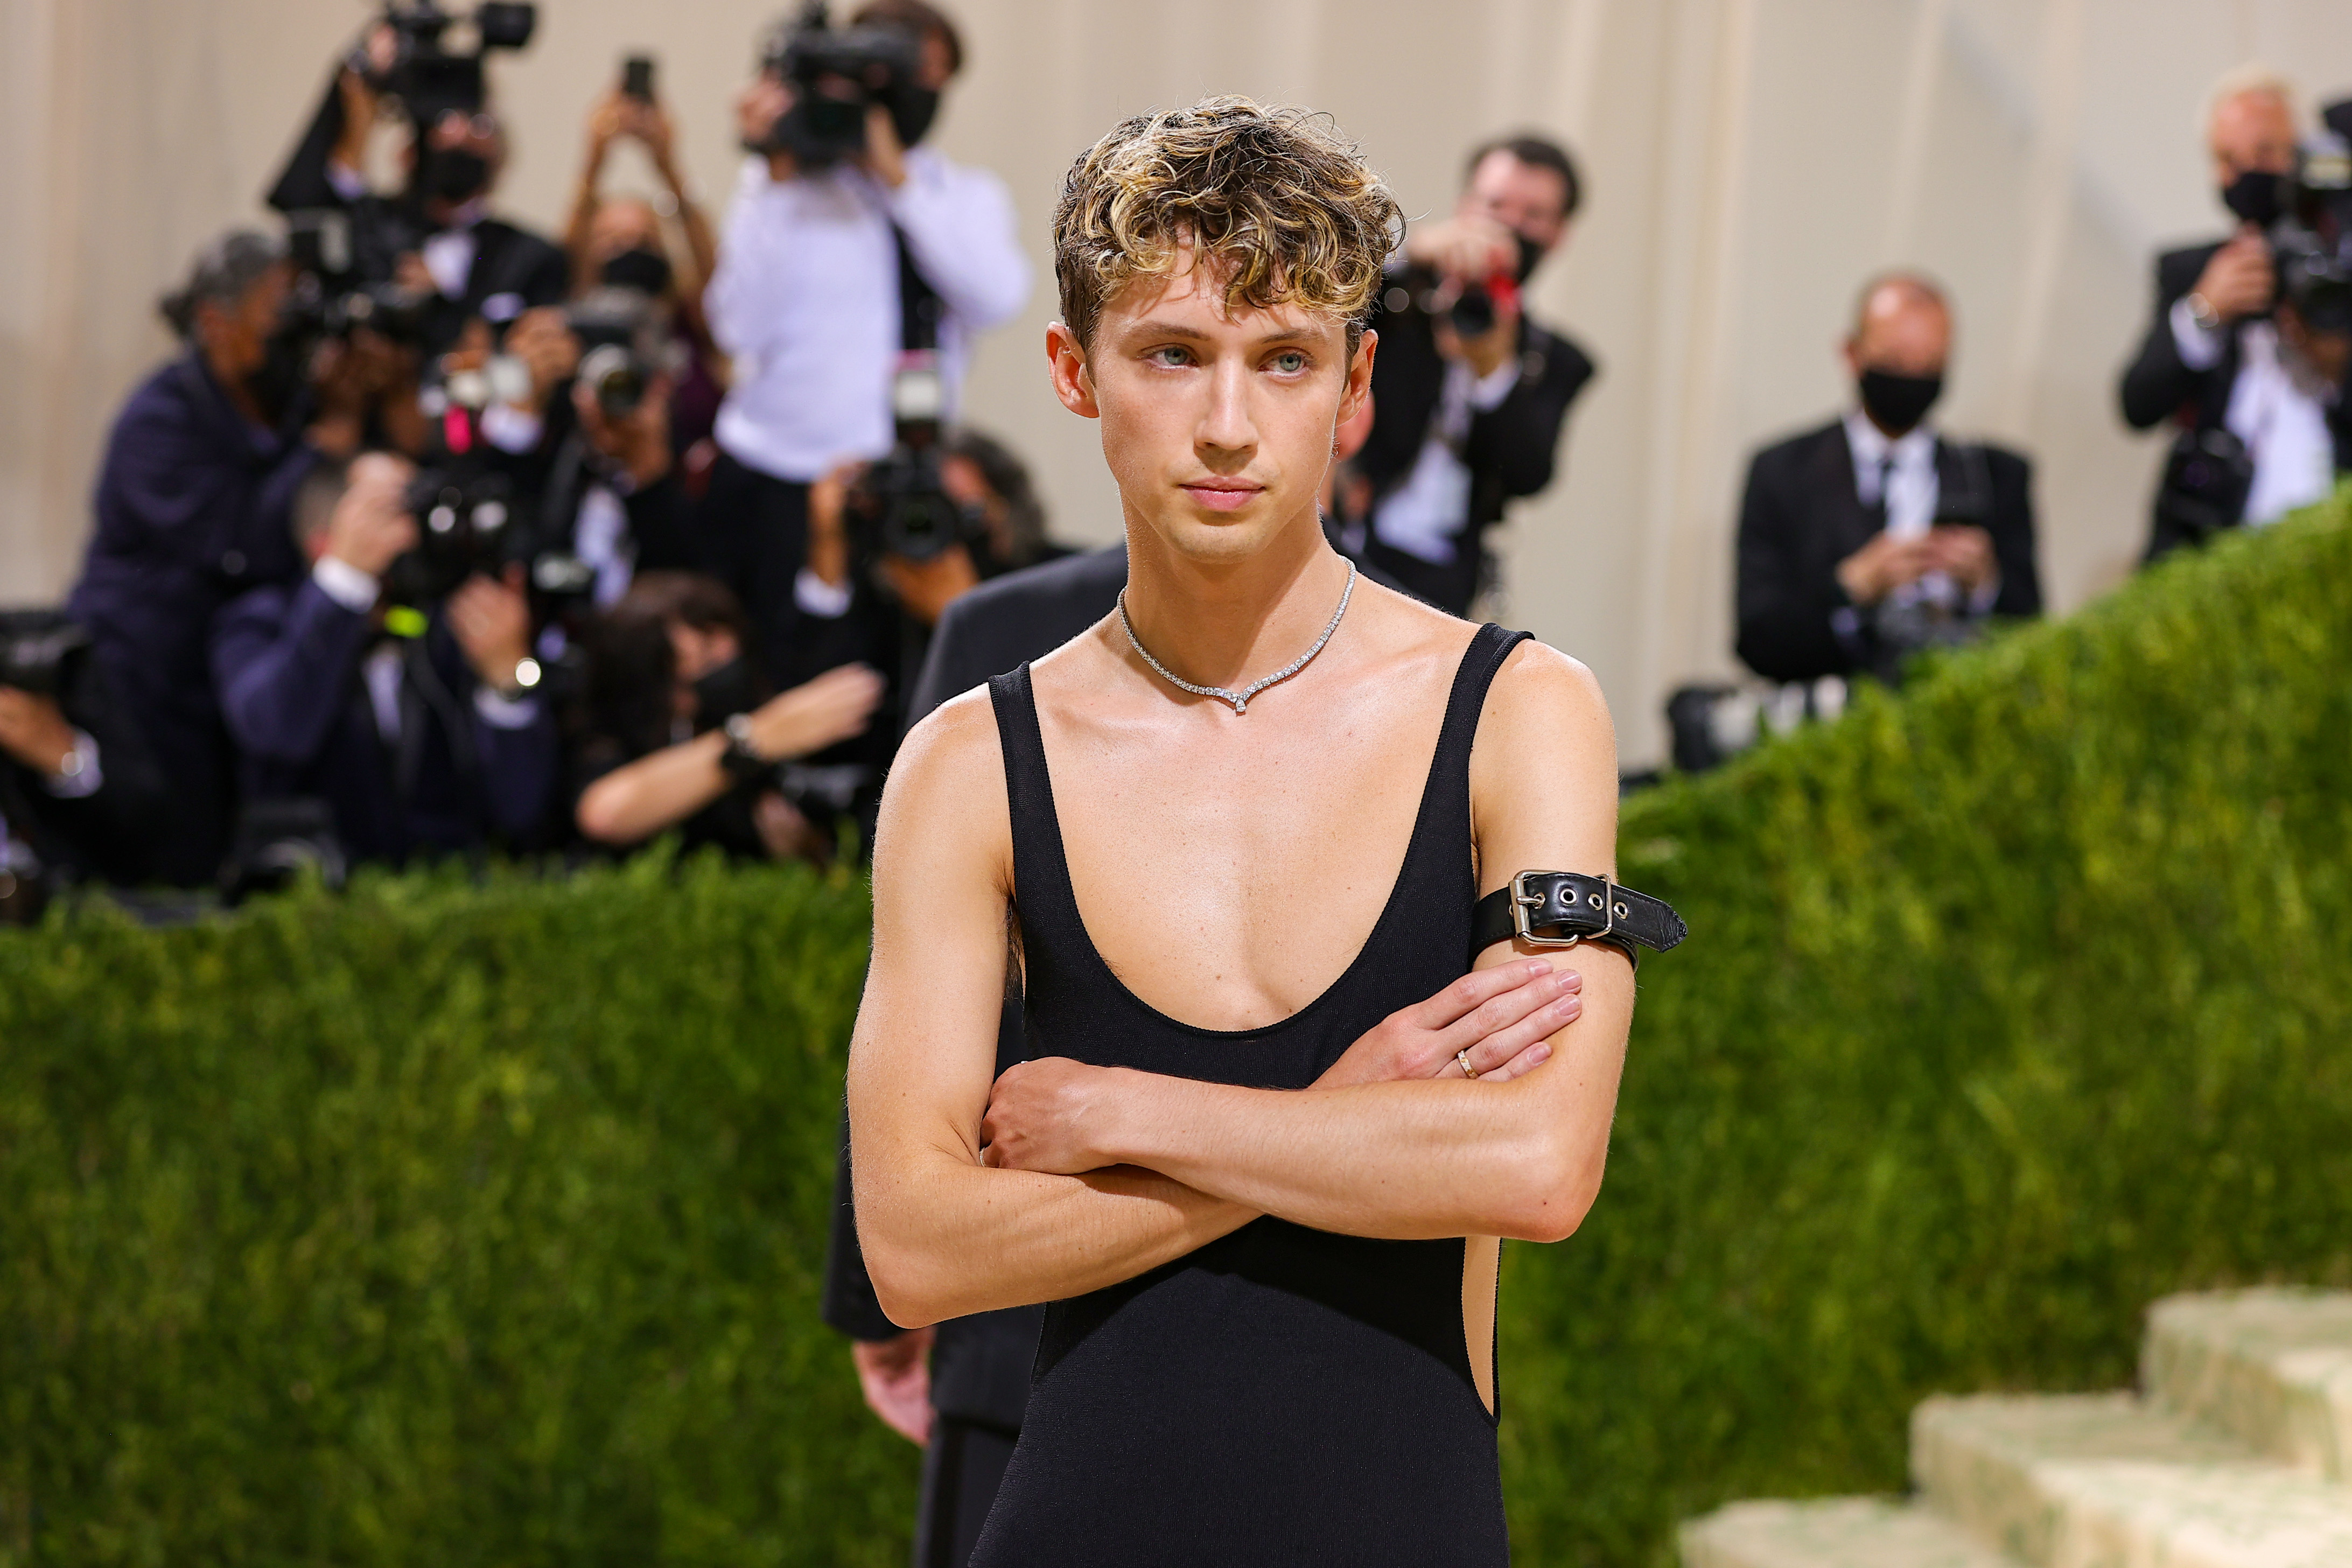 Troye Sivan attends The 2021 Met Gala Celebrating In America: A Lexicon Of Fashion at Metropolitan Museum of Art, on September 13, 2021, in New York City. | Source: Getty Images